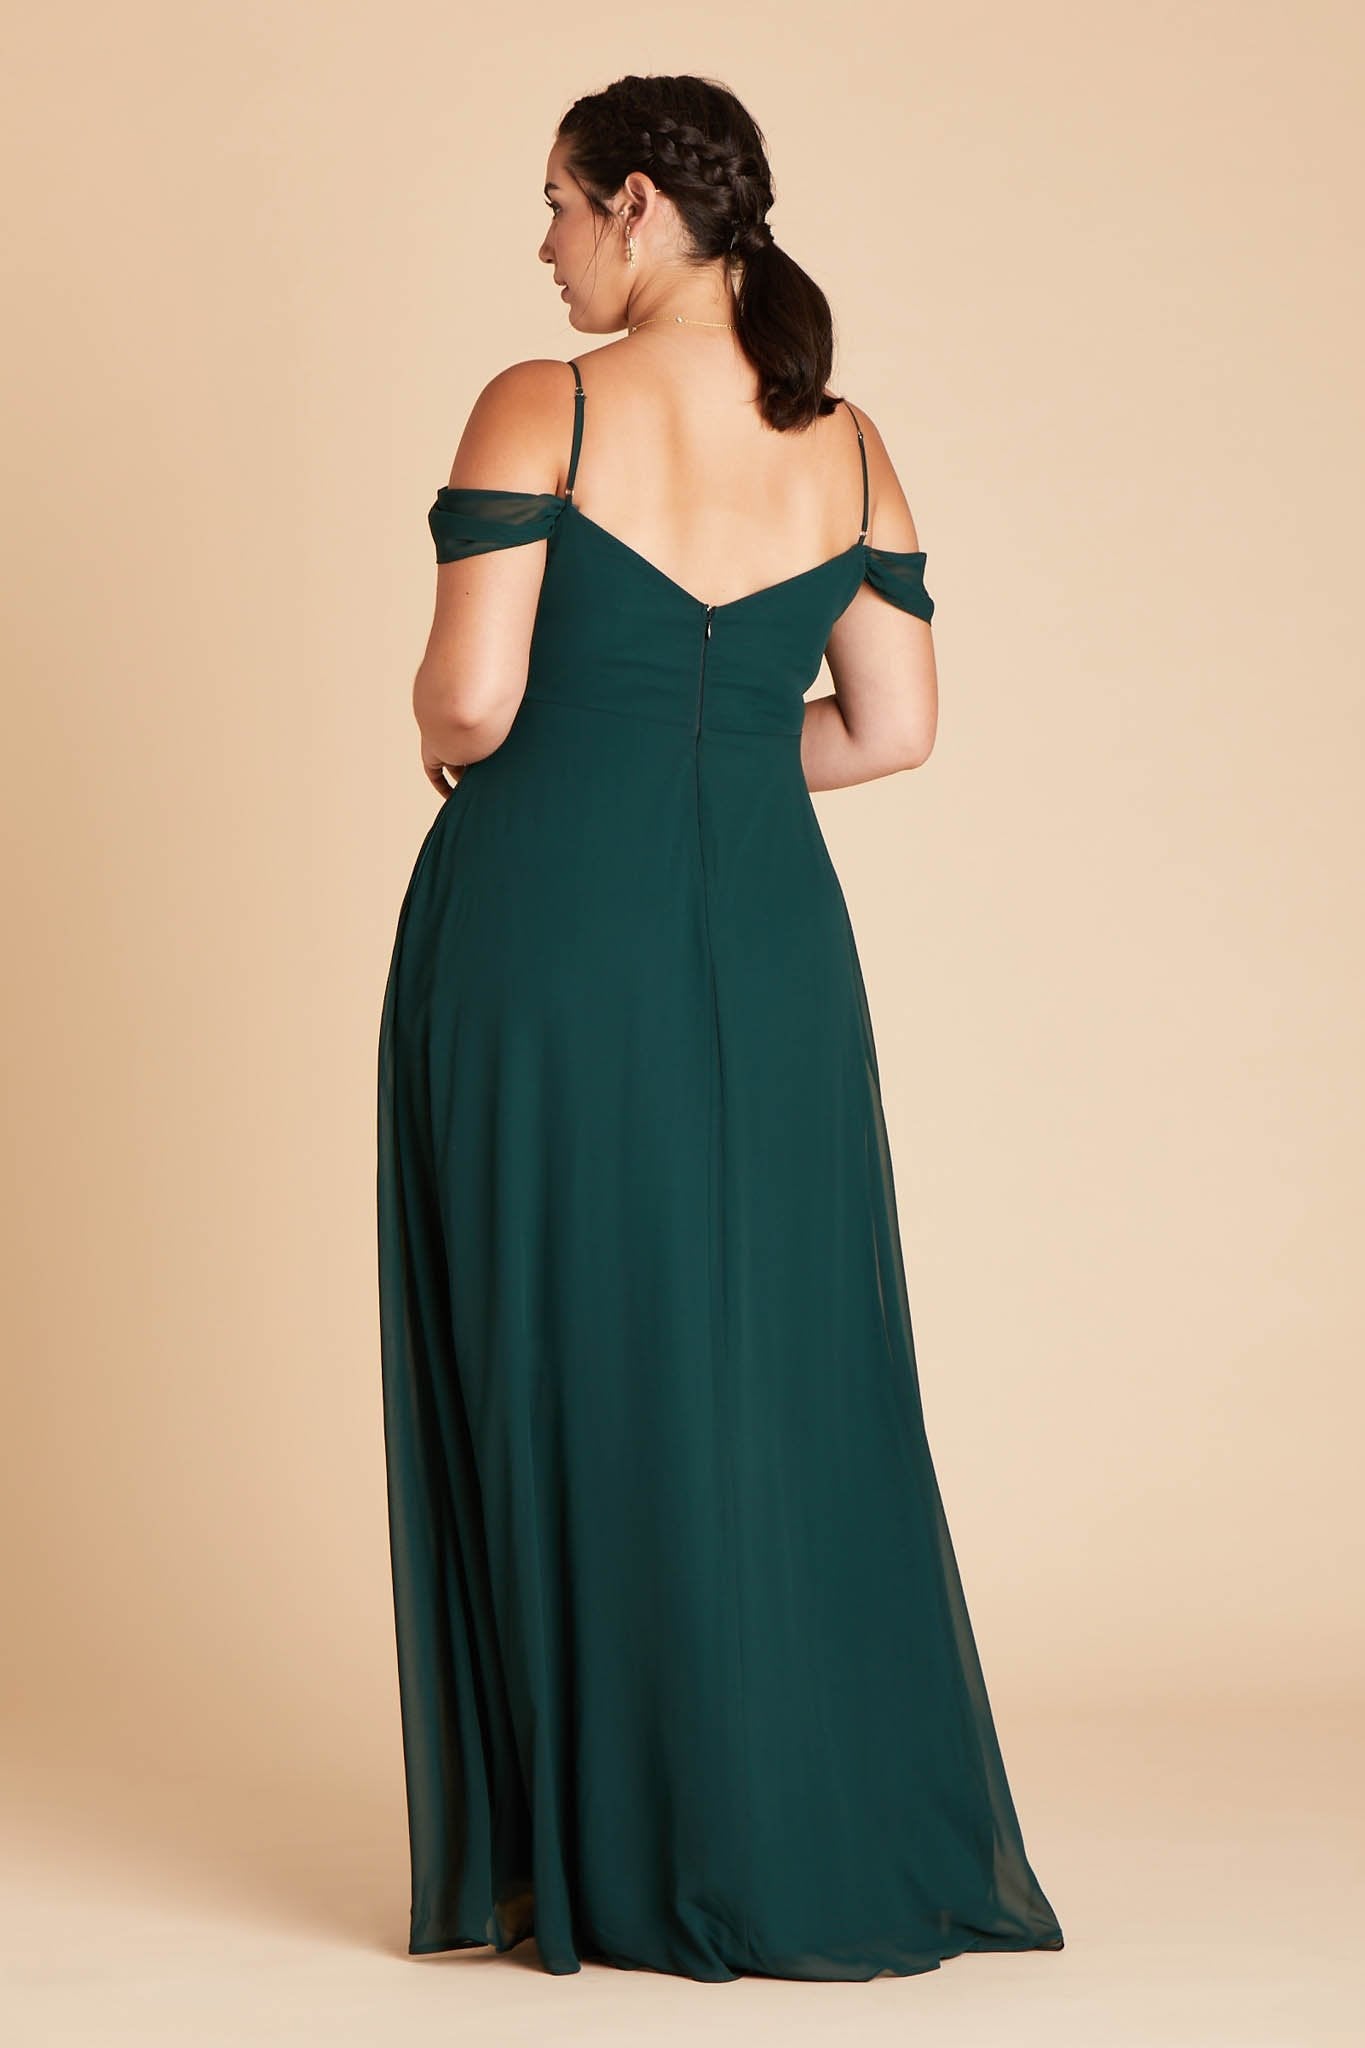 Back view of the floor-length Devin Convertible Plus Size Bridesmaid Dress in emerald chiffon displays adjustable spaghetti straps and an open back with a slight v-cut just below the shoulder blades.